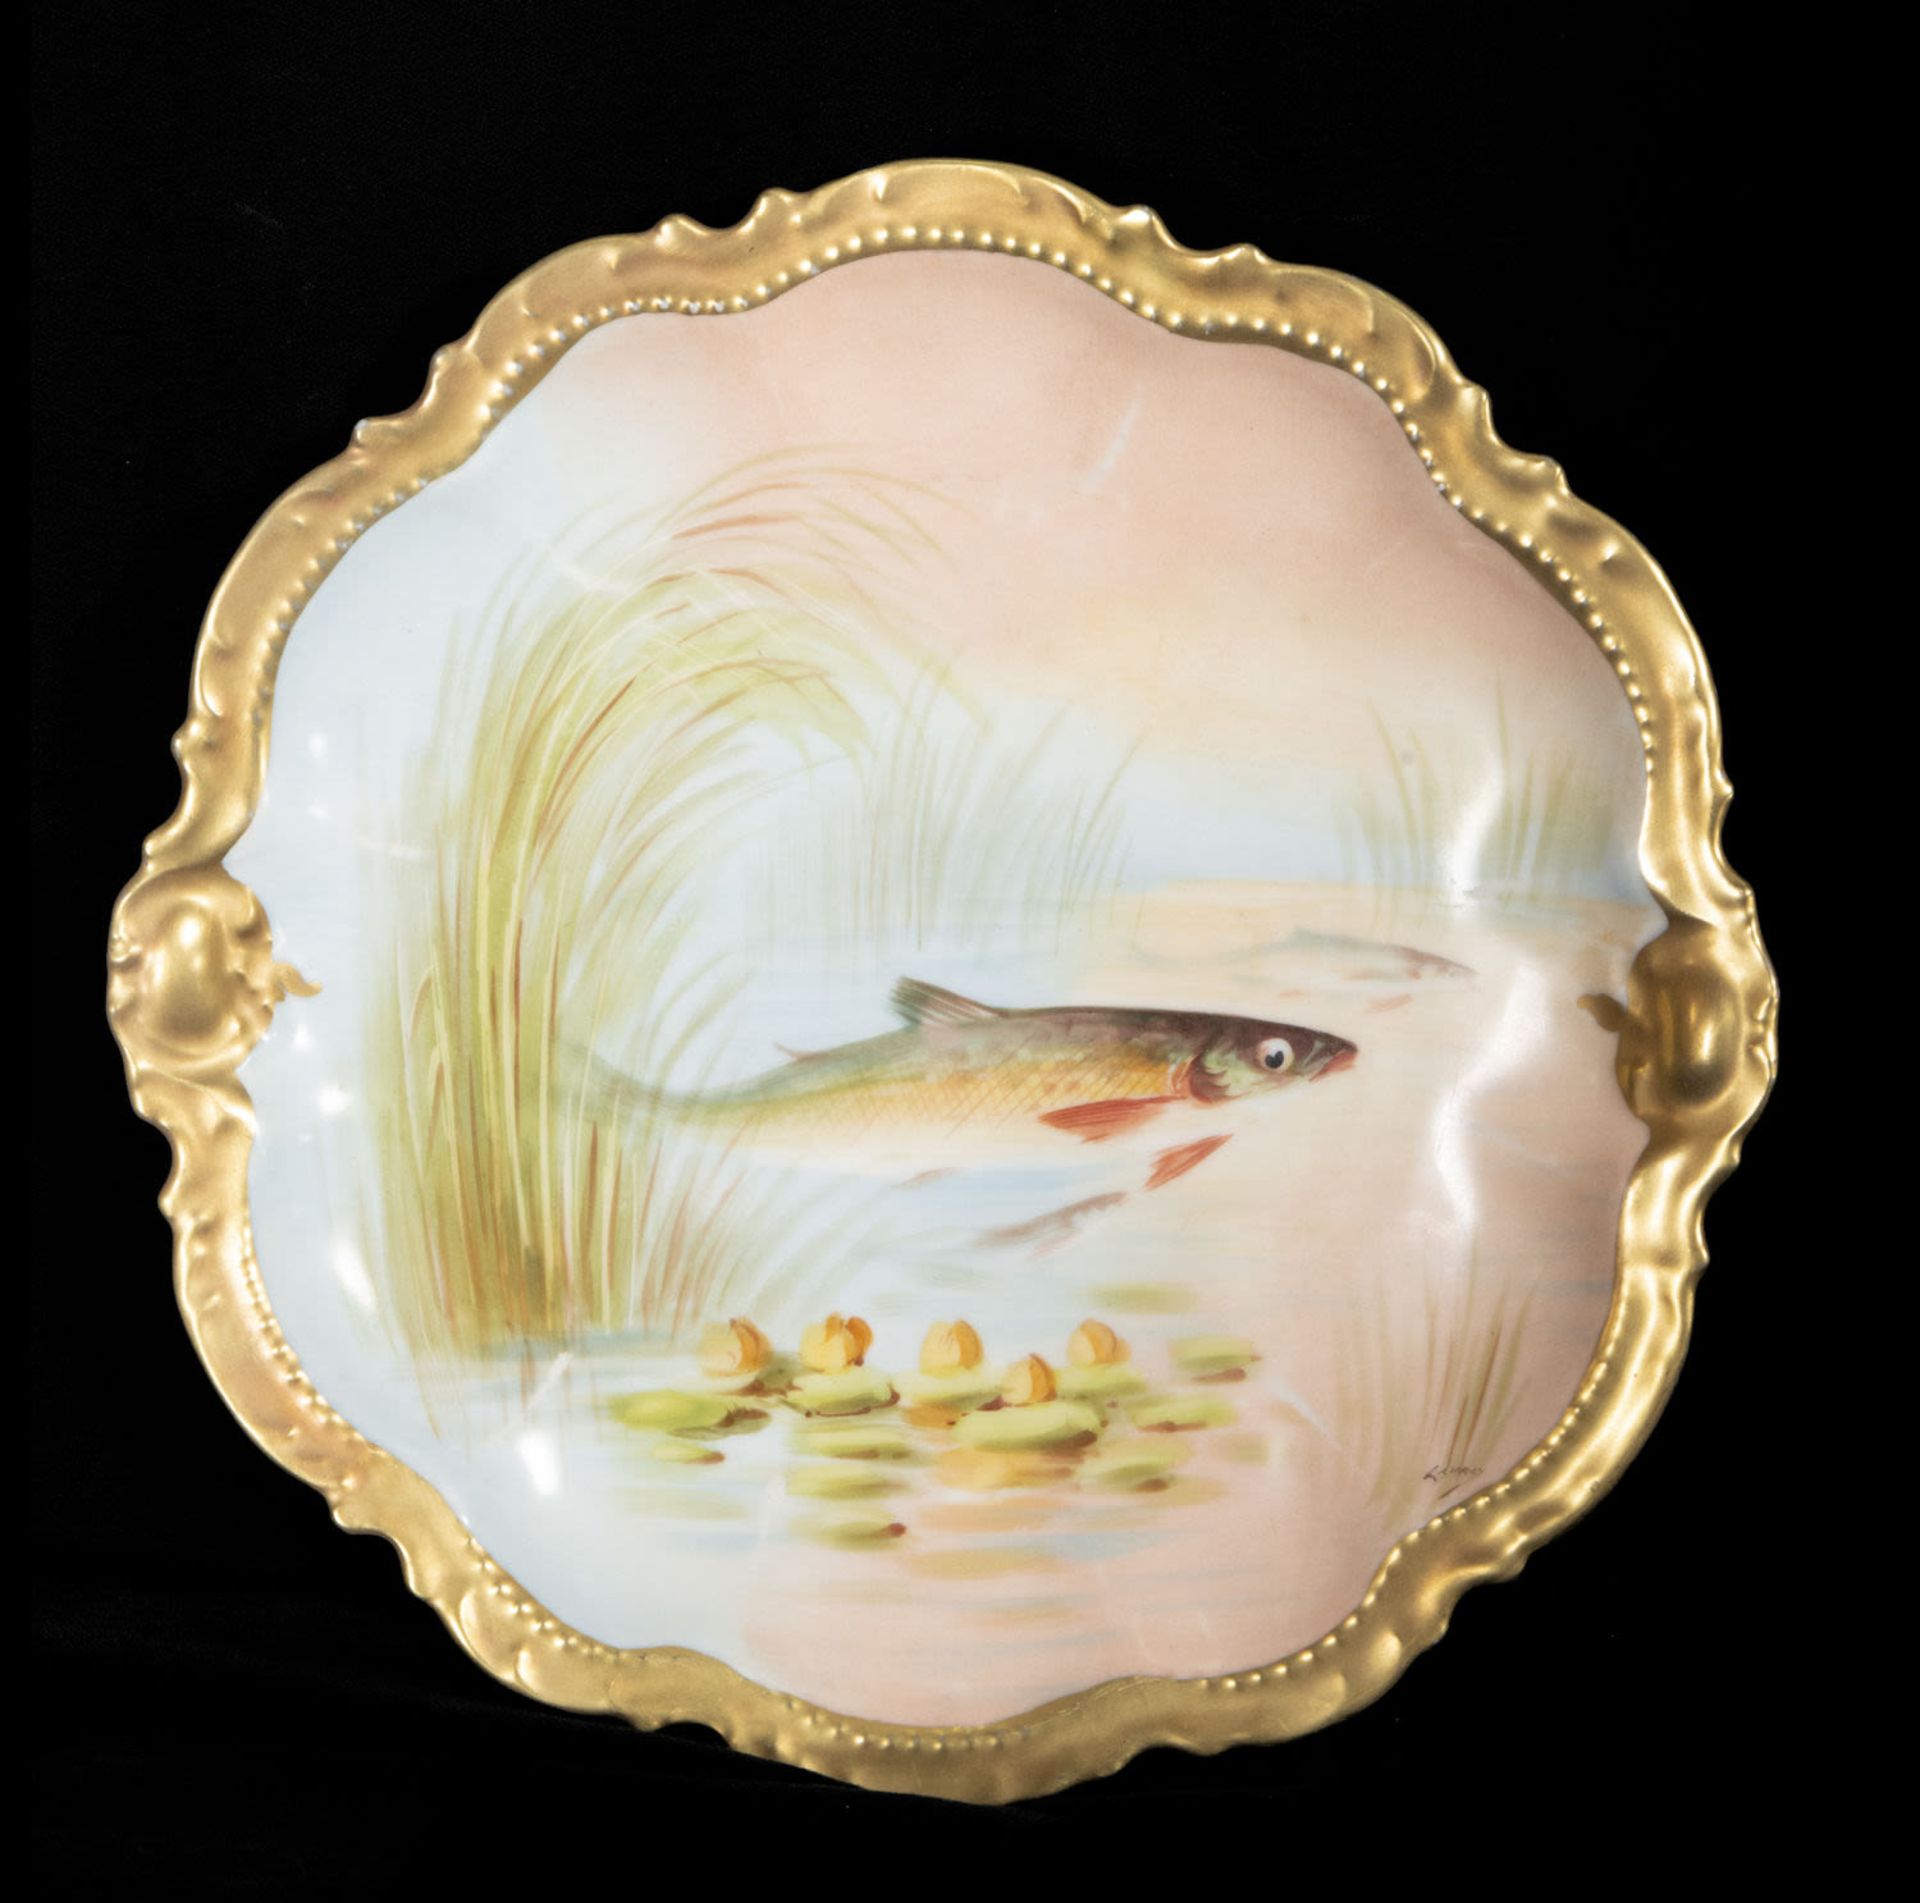 19th Century Limoges Porcelain Fish Dinnerware Set by the Count of Artois, 19th Century - Image 7 of 12